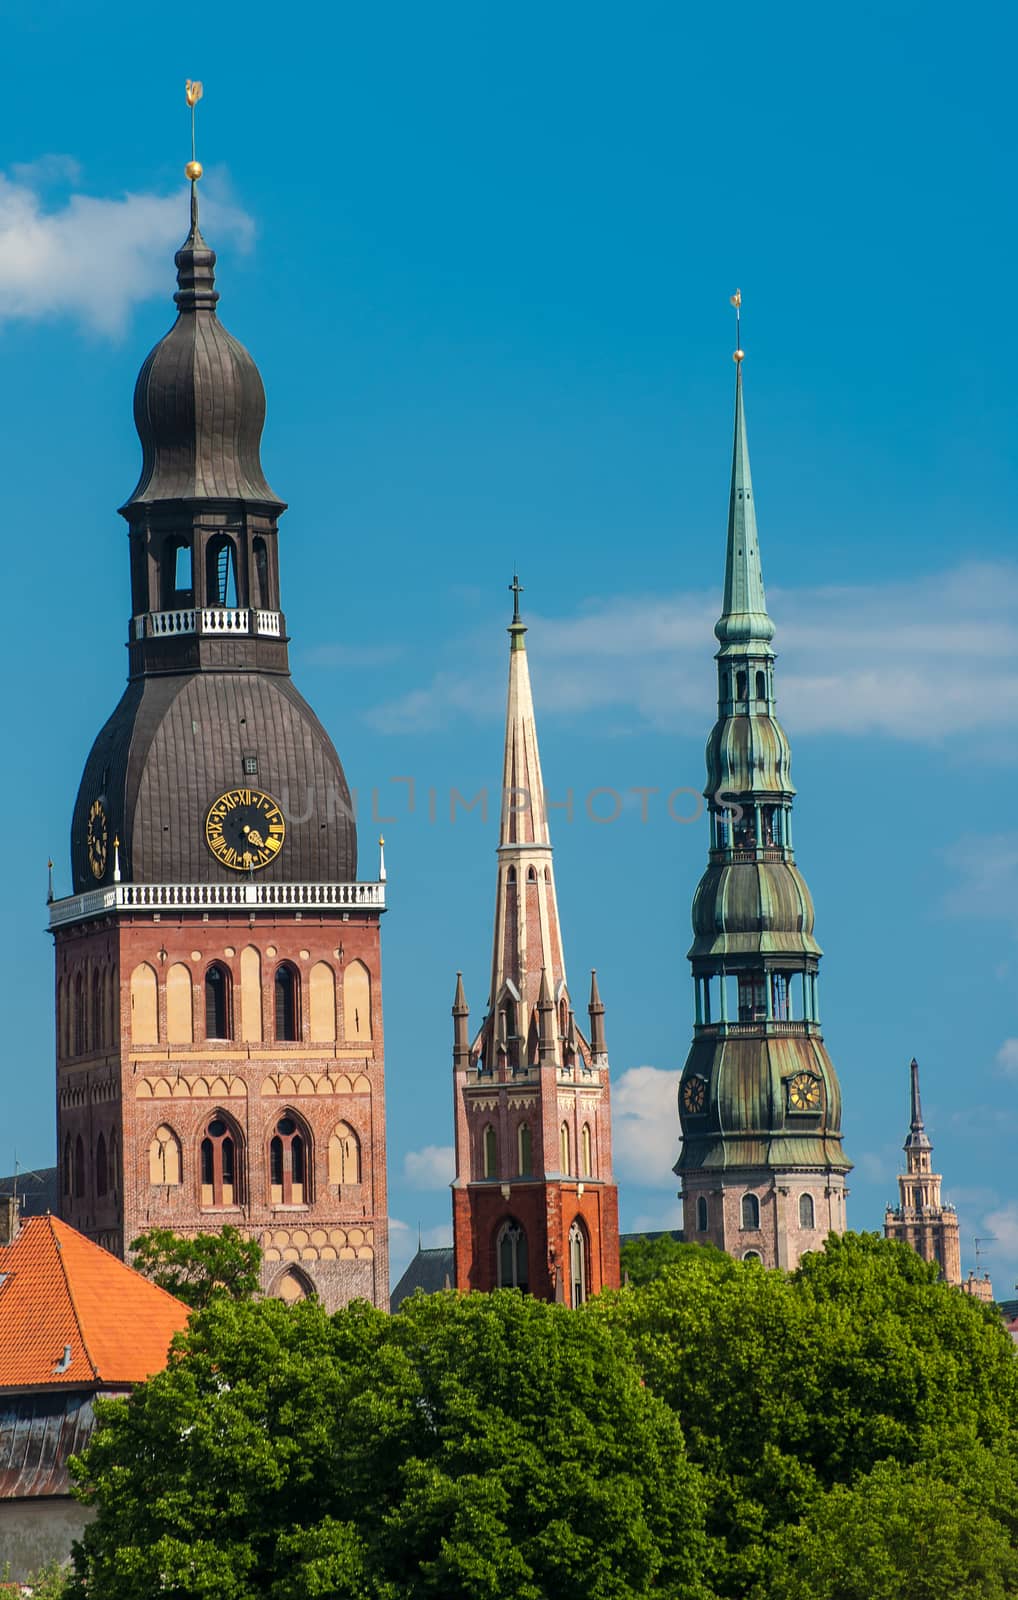 Towers of Riga seen in Riga. Three church towers in the picture are the Riga Dome cathedral,  St. Saviour's Church and St. Peter's church. On the right is Building of Academy of Sciences